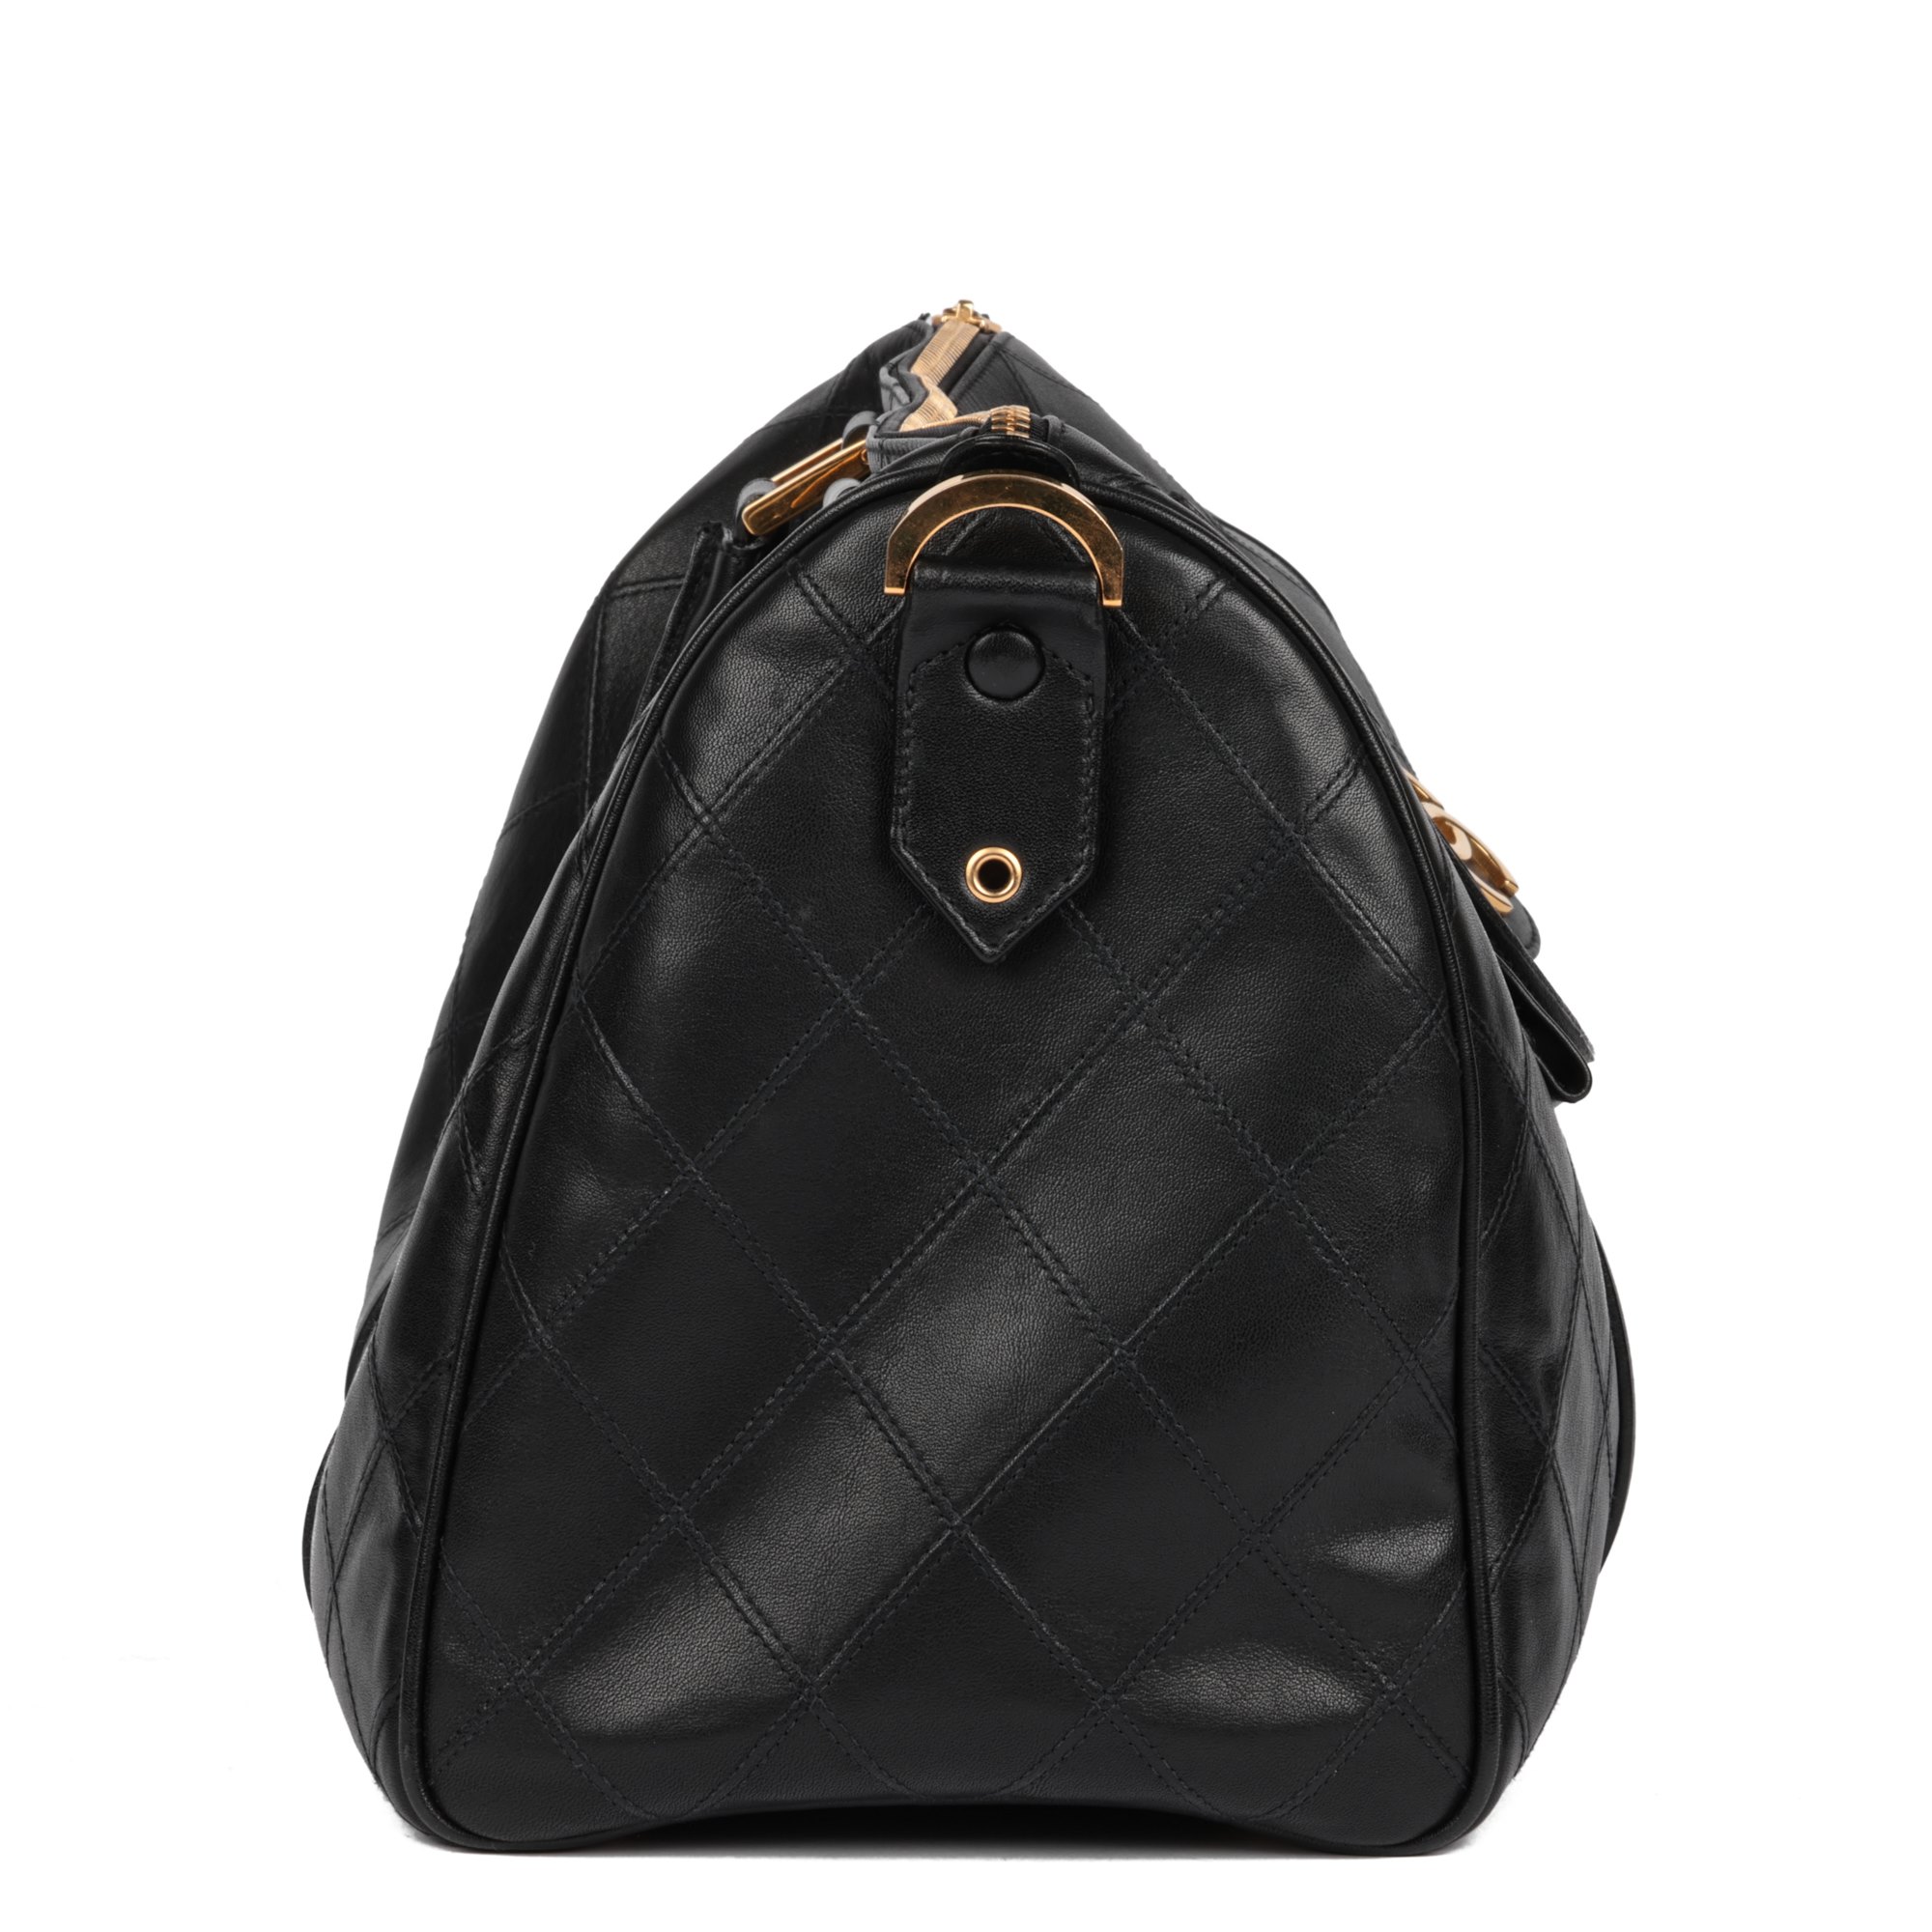 Chanel Black Quilted Lambskin Leather Boston 35cm